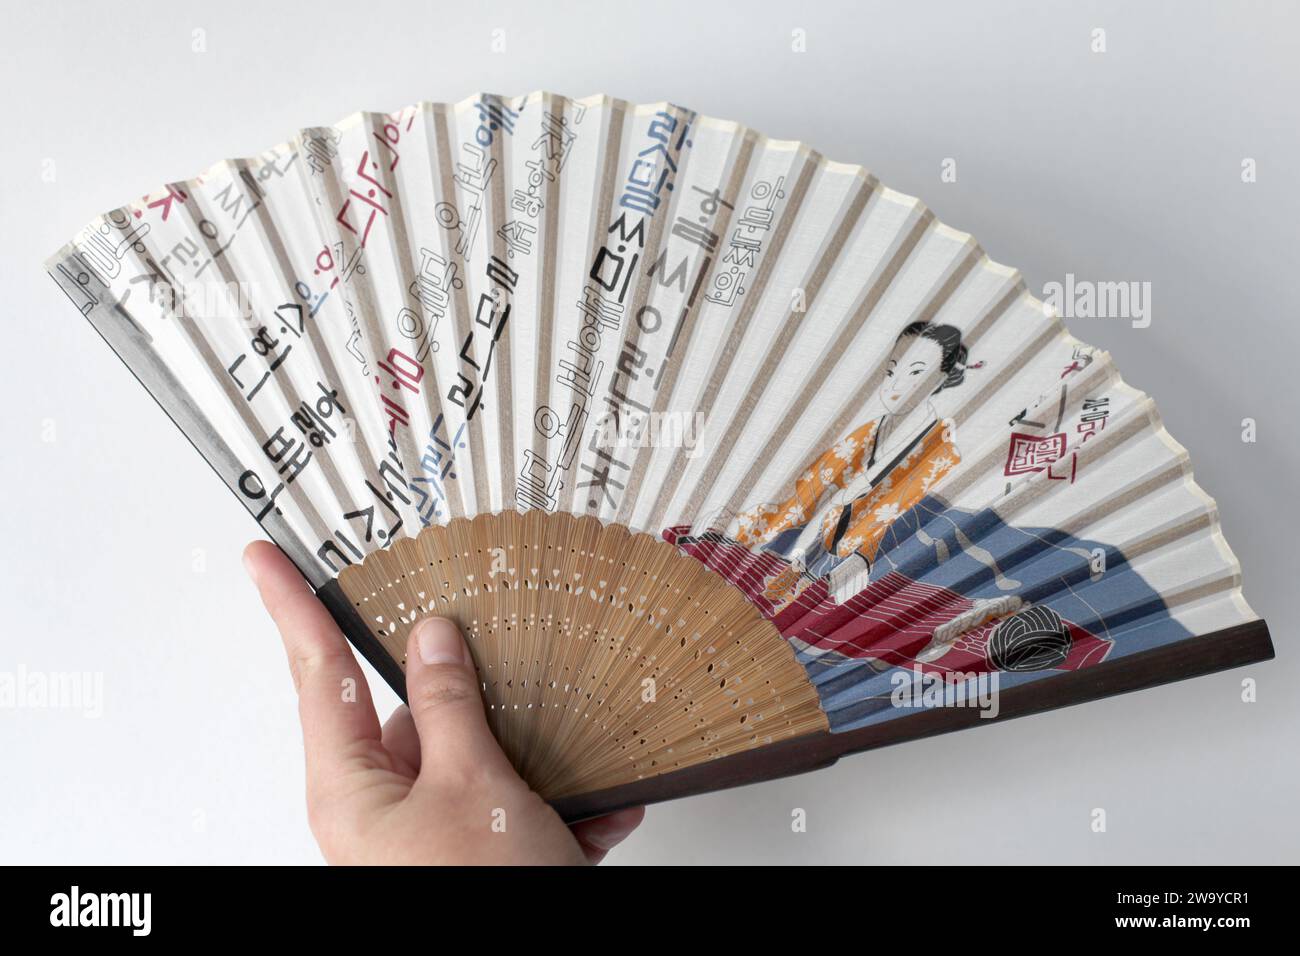 A buchae or traditional Korean fan which is often highly decorated. Stock Photo